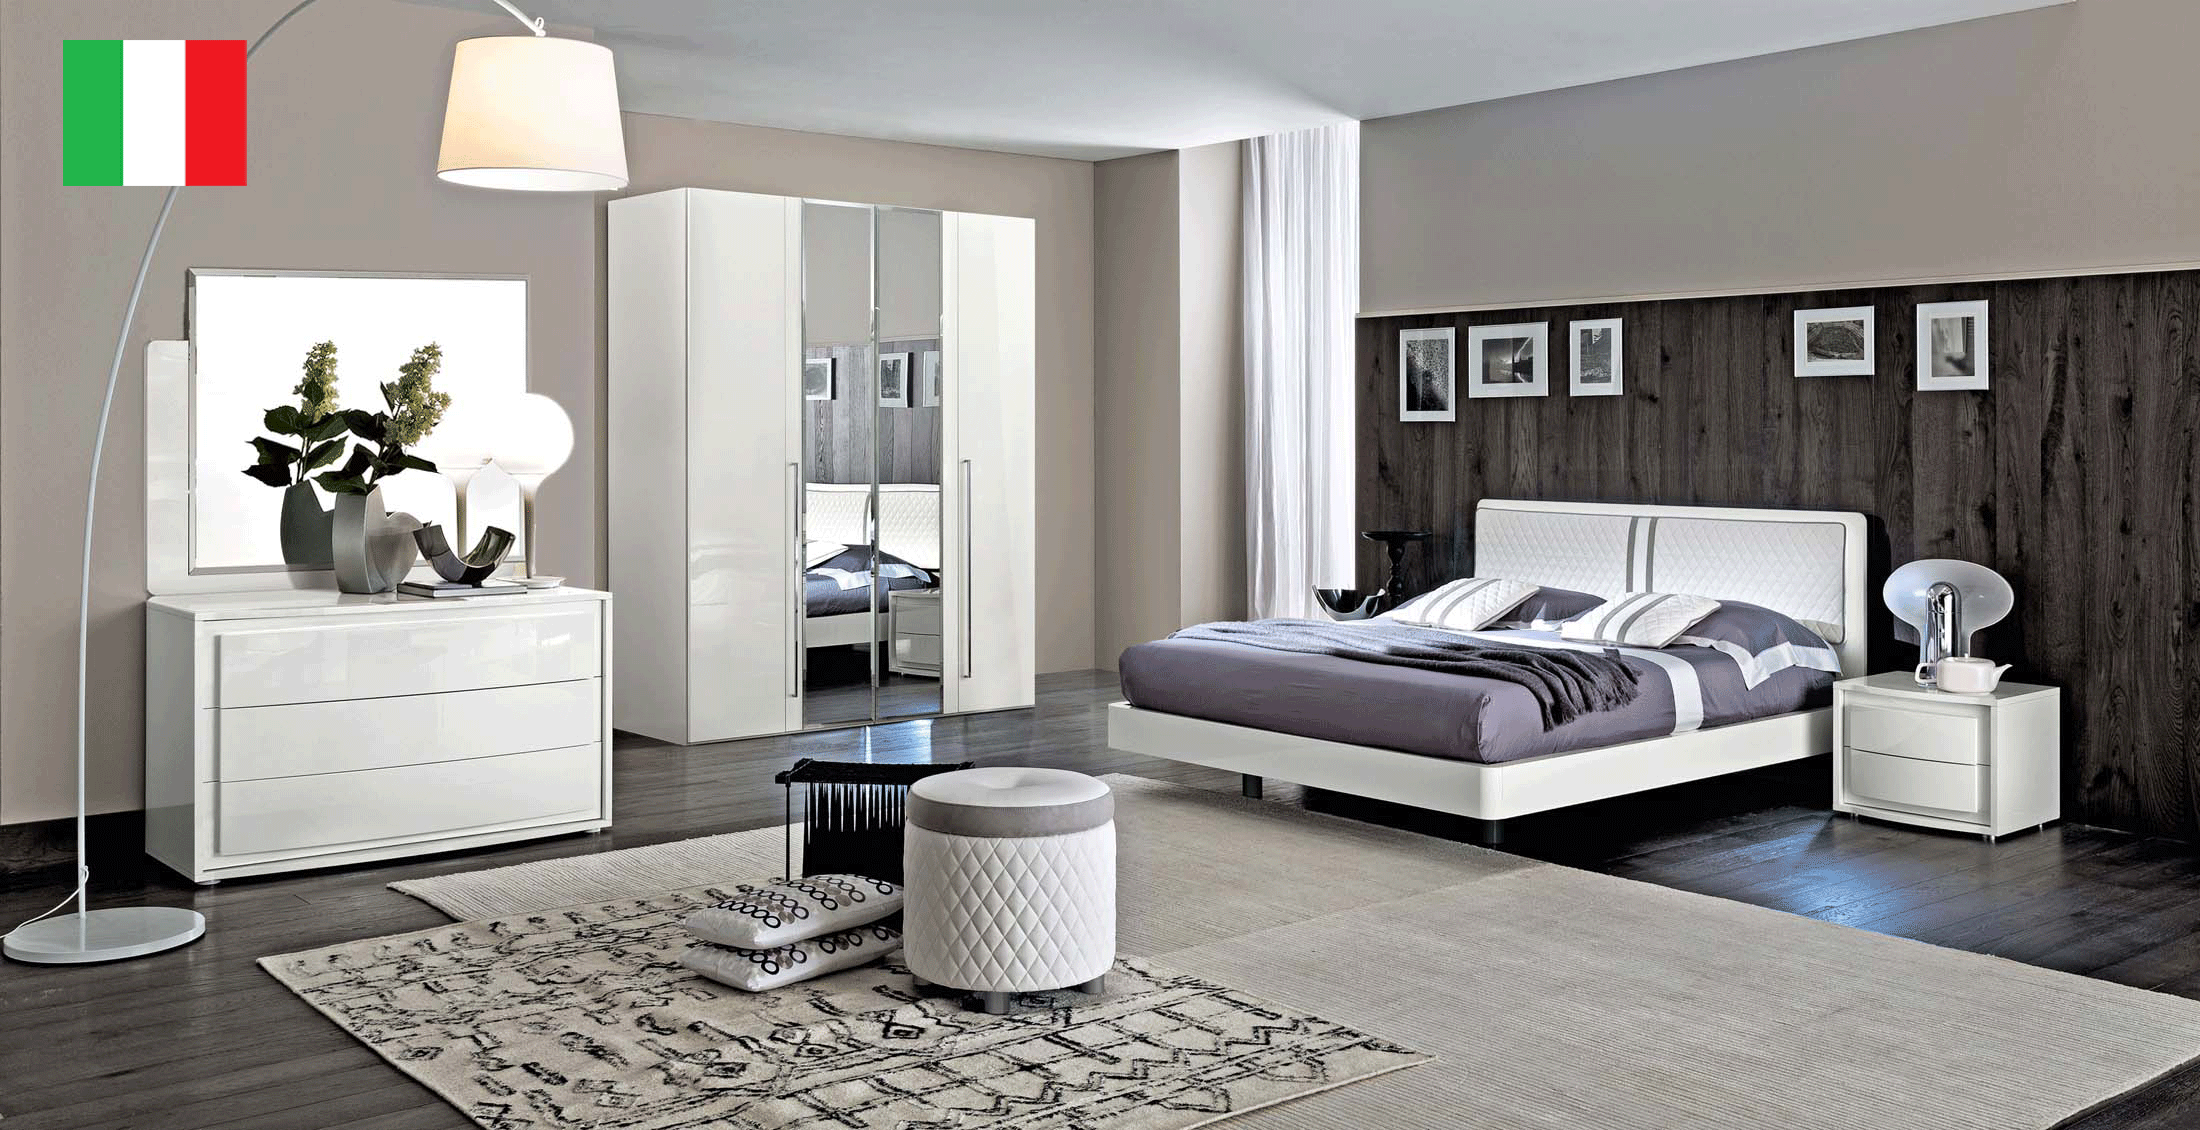 Bedroom Furniture Beds with storage Dama Bianca Bedroom by CamelGroup Italy